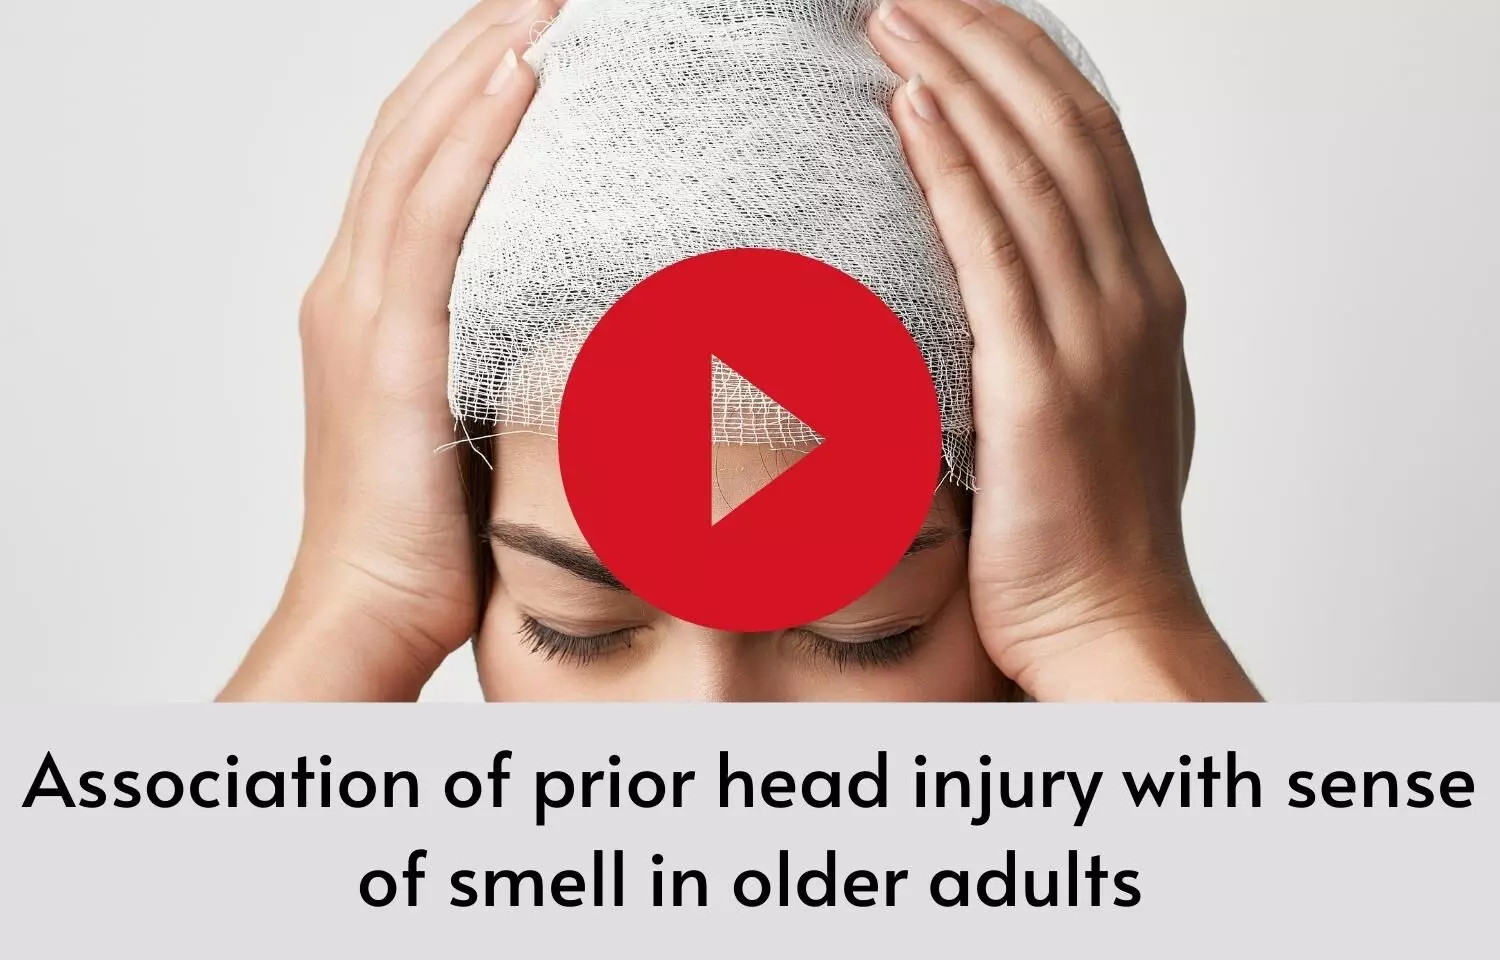 Association of prior head injury with sense of smell in older adults